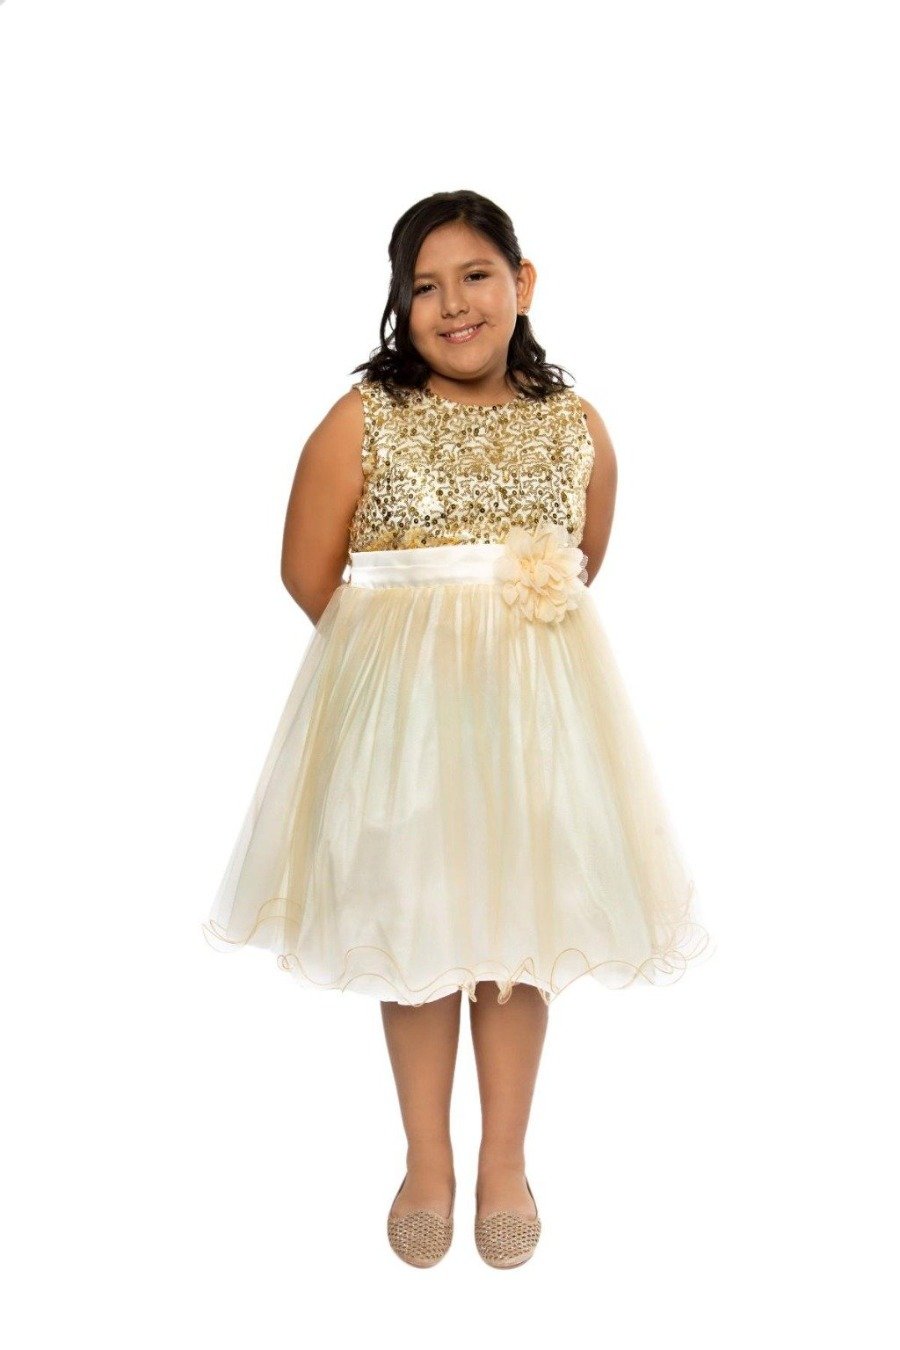 Sequin Girl Party Dress by AS305 Kids Dream - Girl Formal Dresses